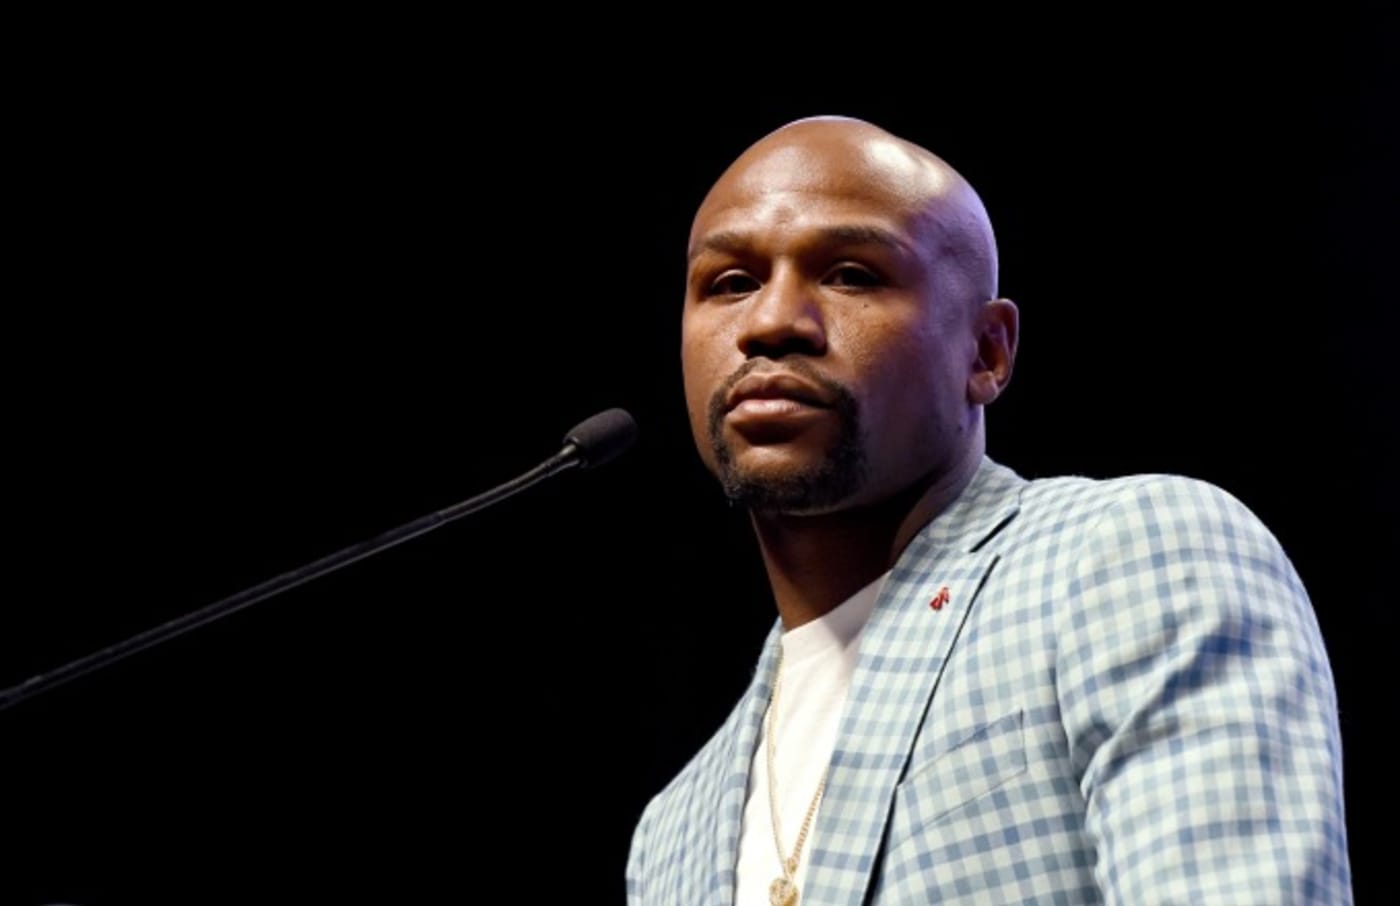 Floyd Mayweather delivers a speech.